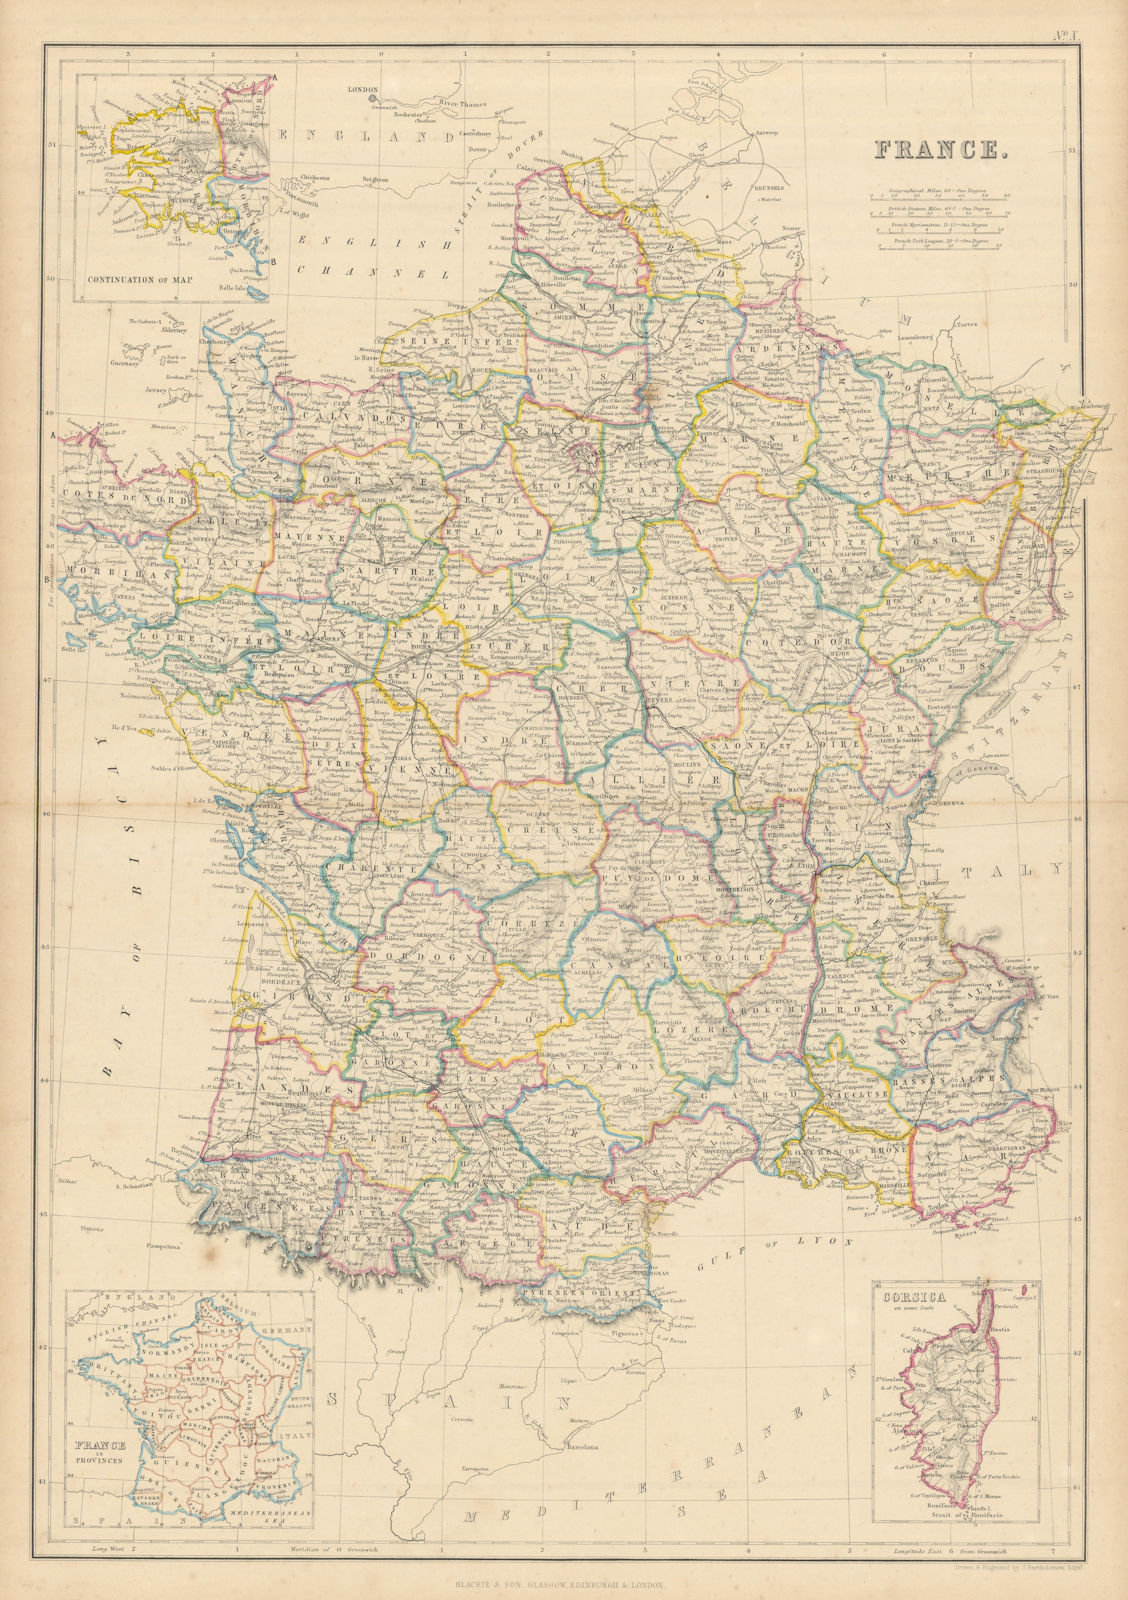 France in Departments by John Bartholomew. With Savoy/Savoie & Nice 1860 map